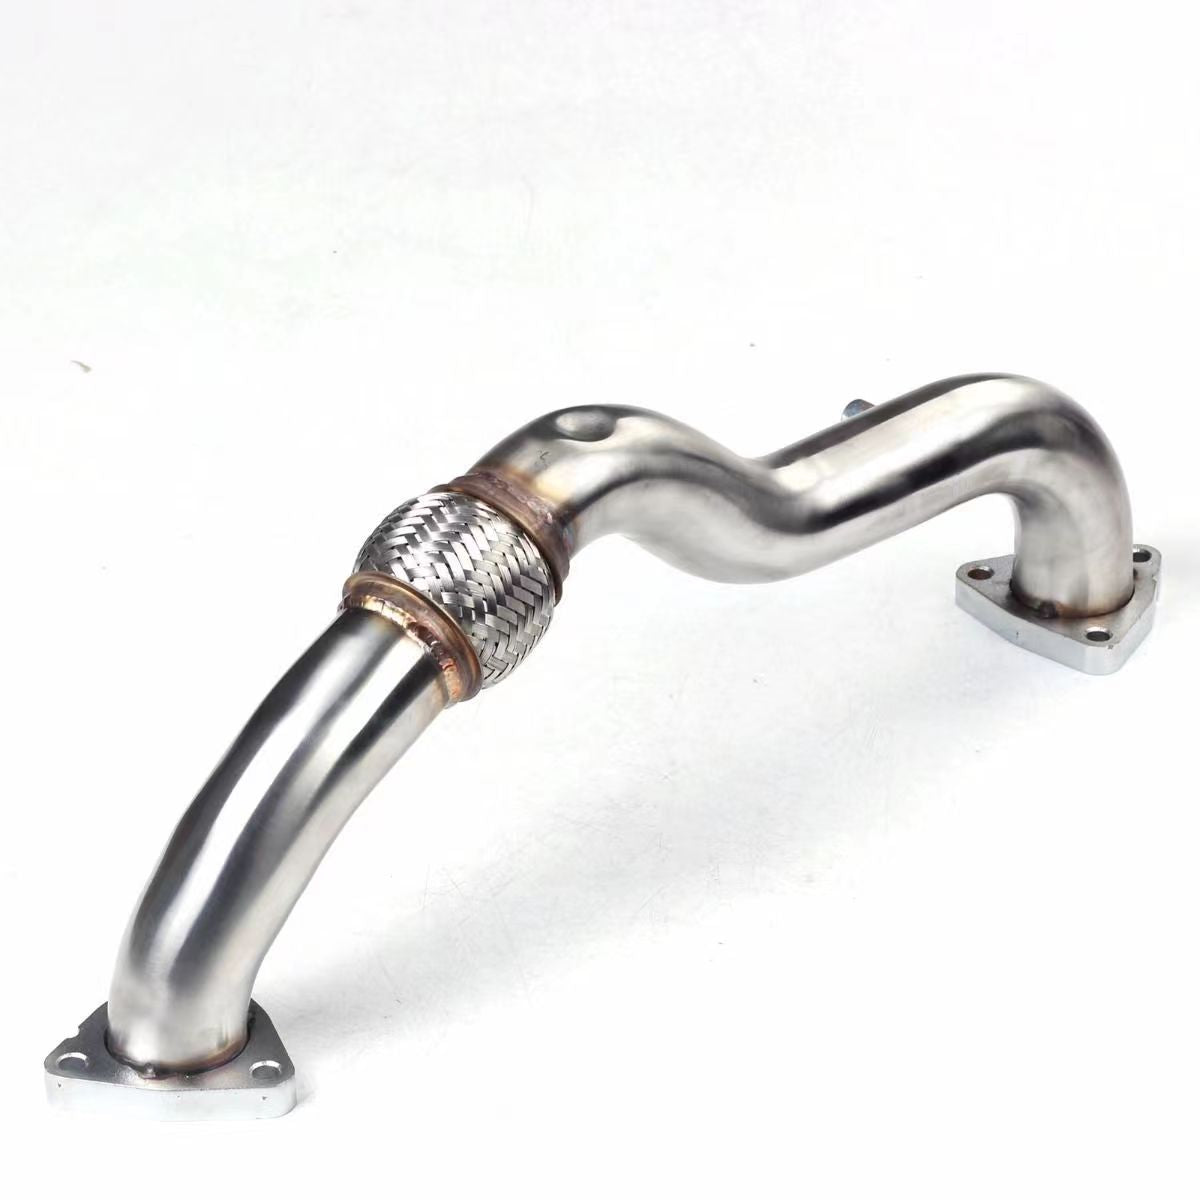 Exhaust Downpipe For 2008-2010 Ford F250 F350 F450 F550 Heavy Duty 6.4L - 0